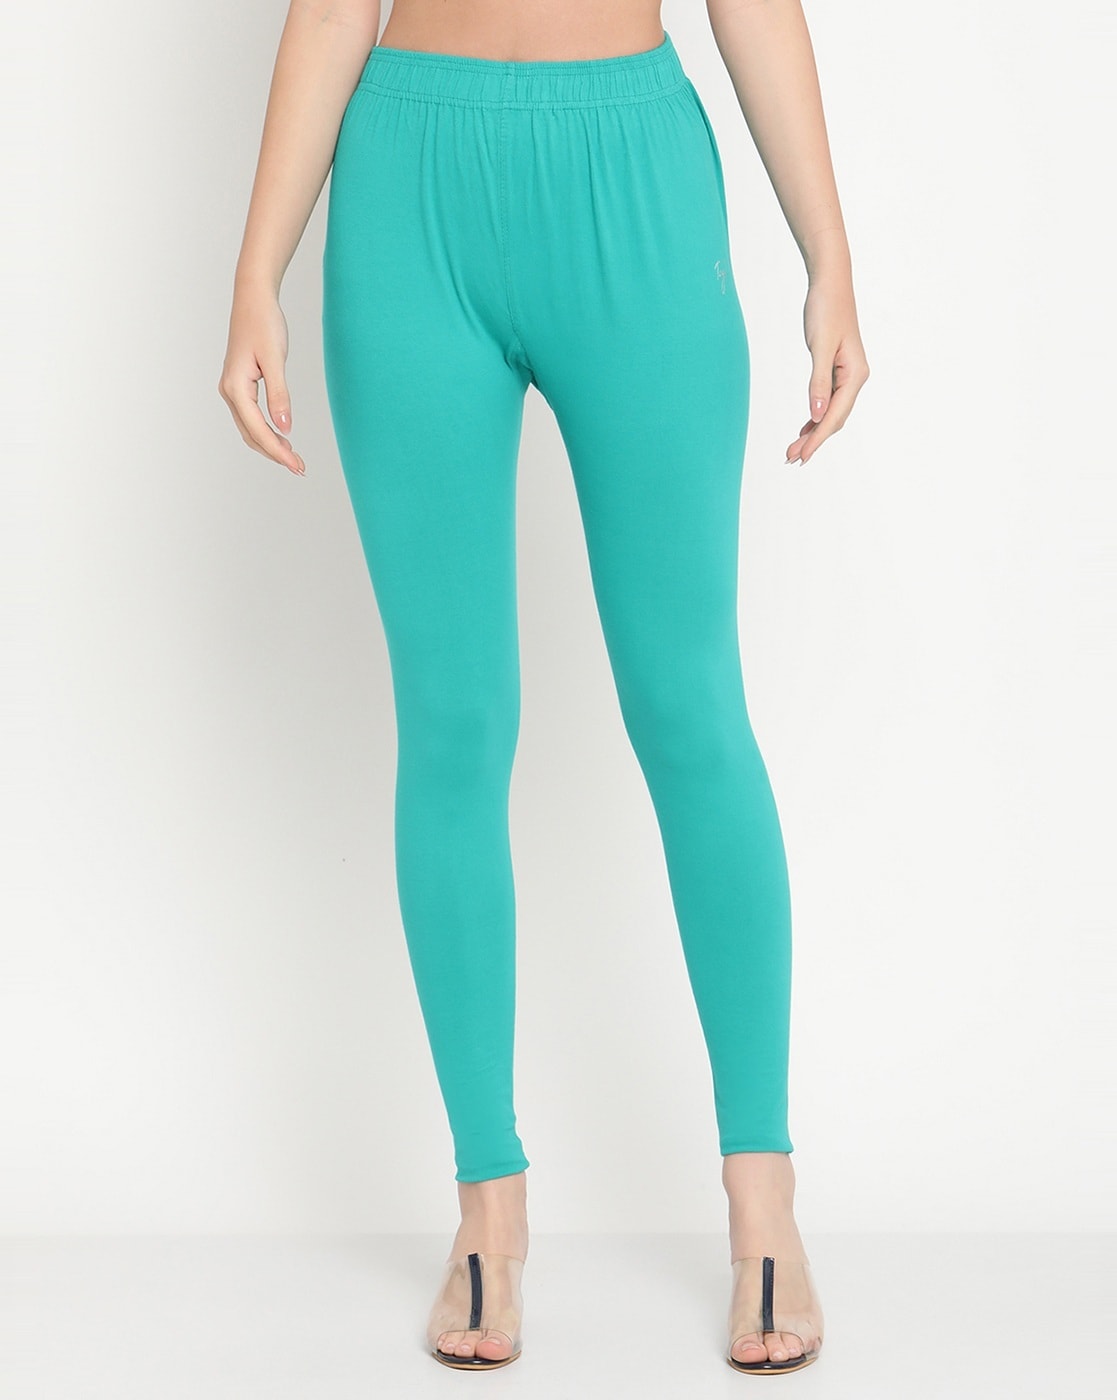 Indian Ladies Turquoise Color Skin Friendly Cotton Lycra Plain Casual  Leggings at Best Price in Bengaluru | Divine Grace Clothing